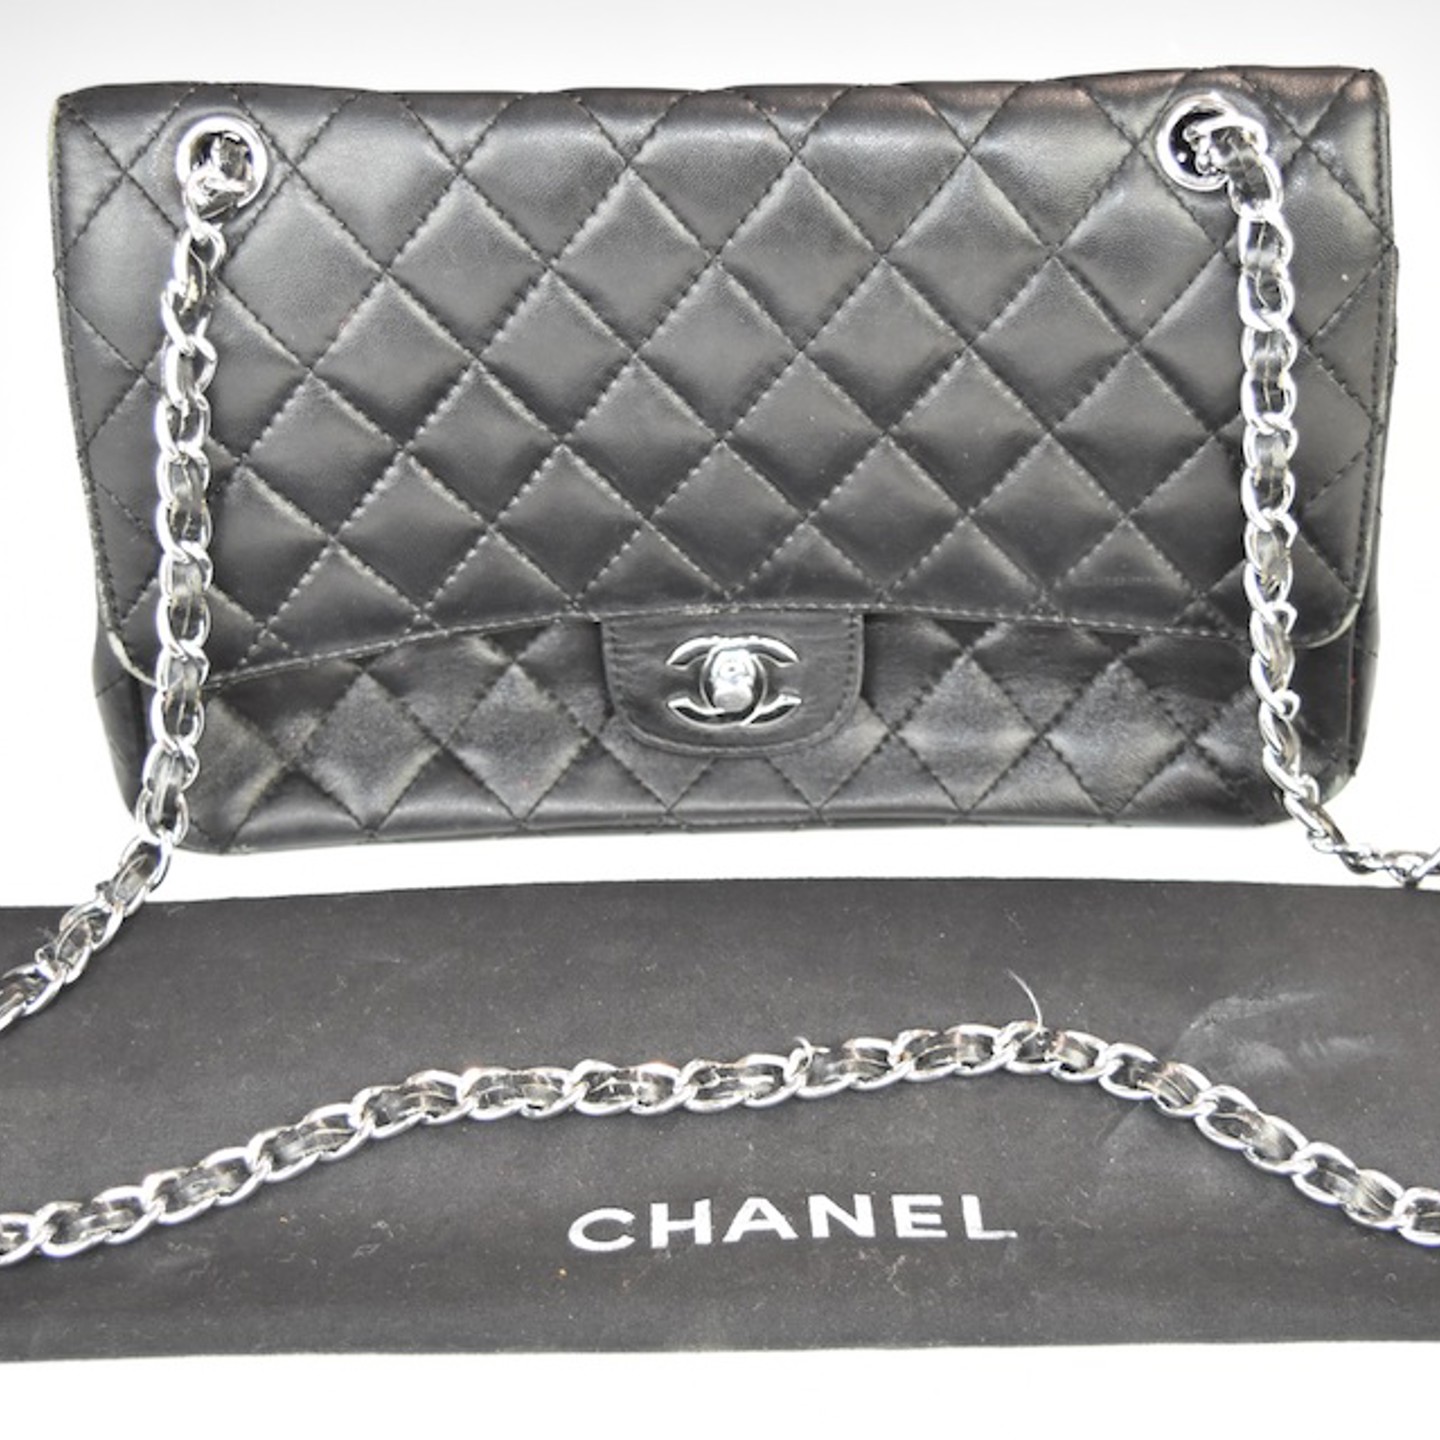 Vintage Chanel Black Leather Handbag With Classic Double Strap And Silver Coloured Fittings, 17 X 25Cm. Sold Ś850